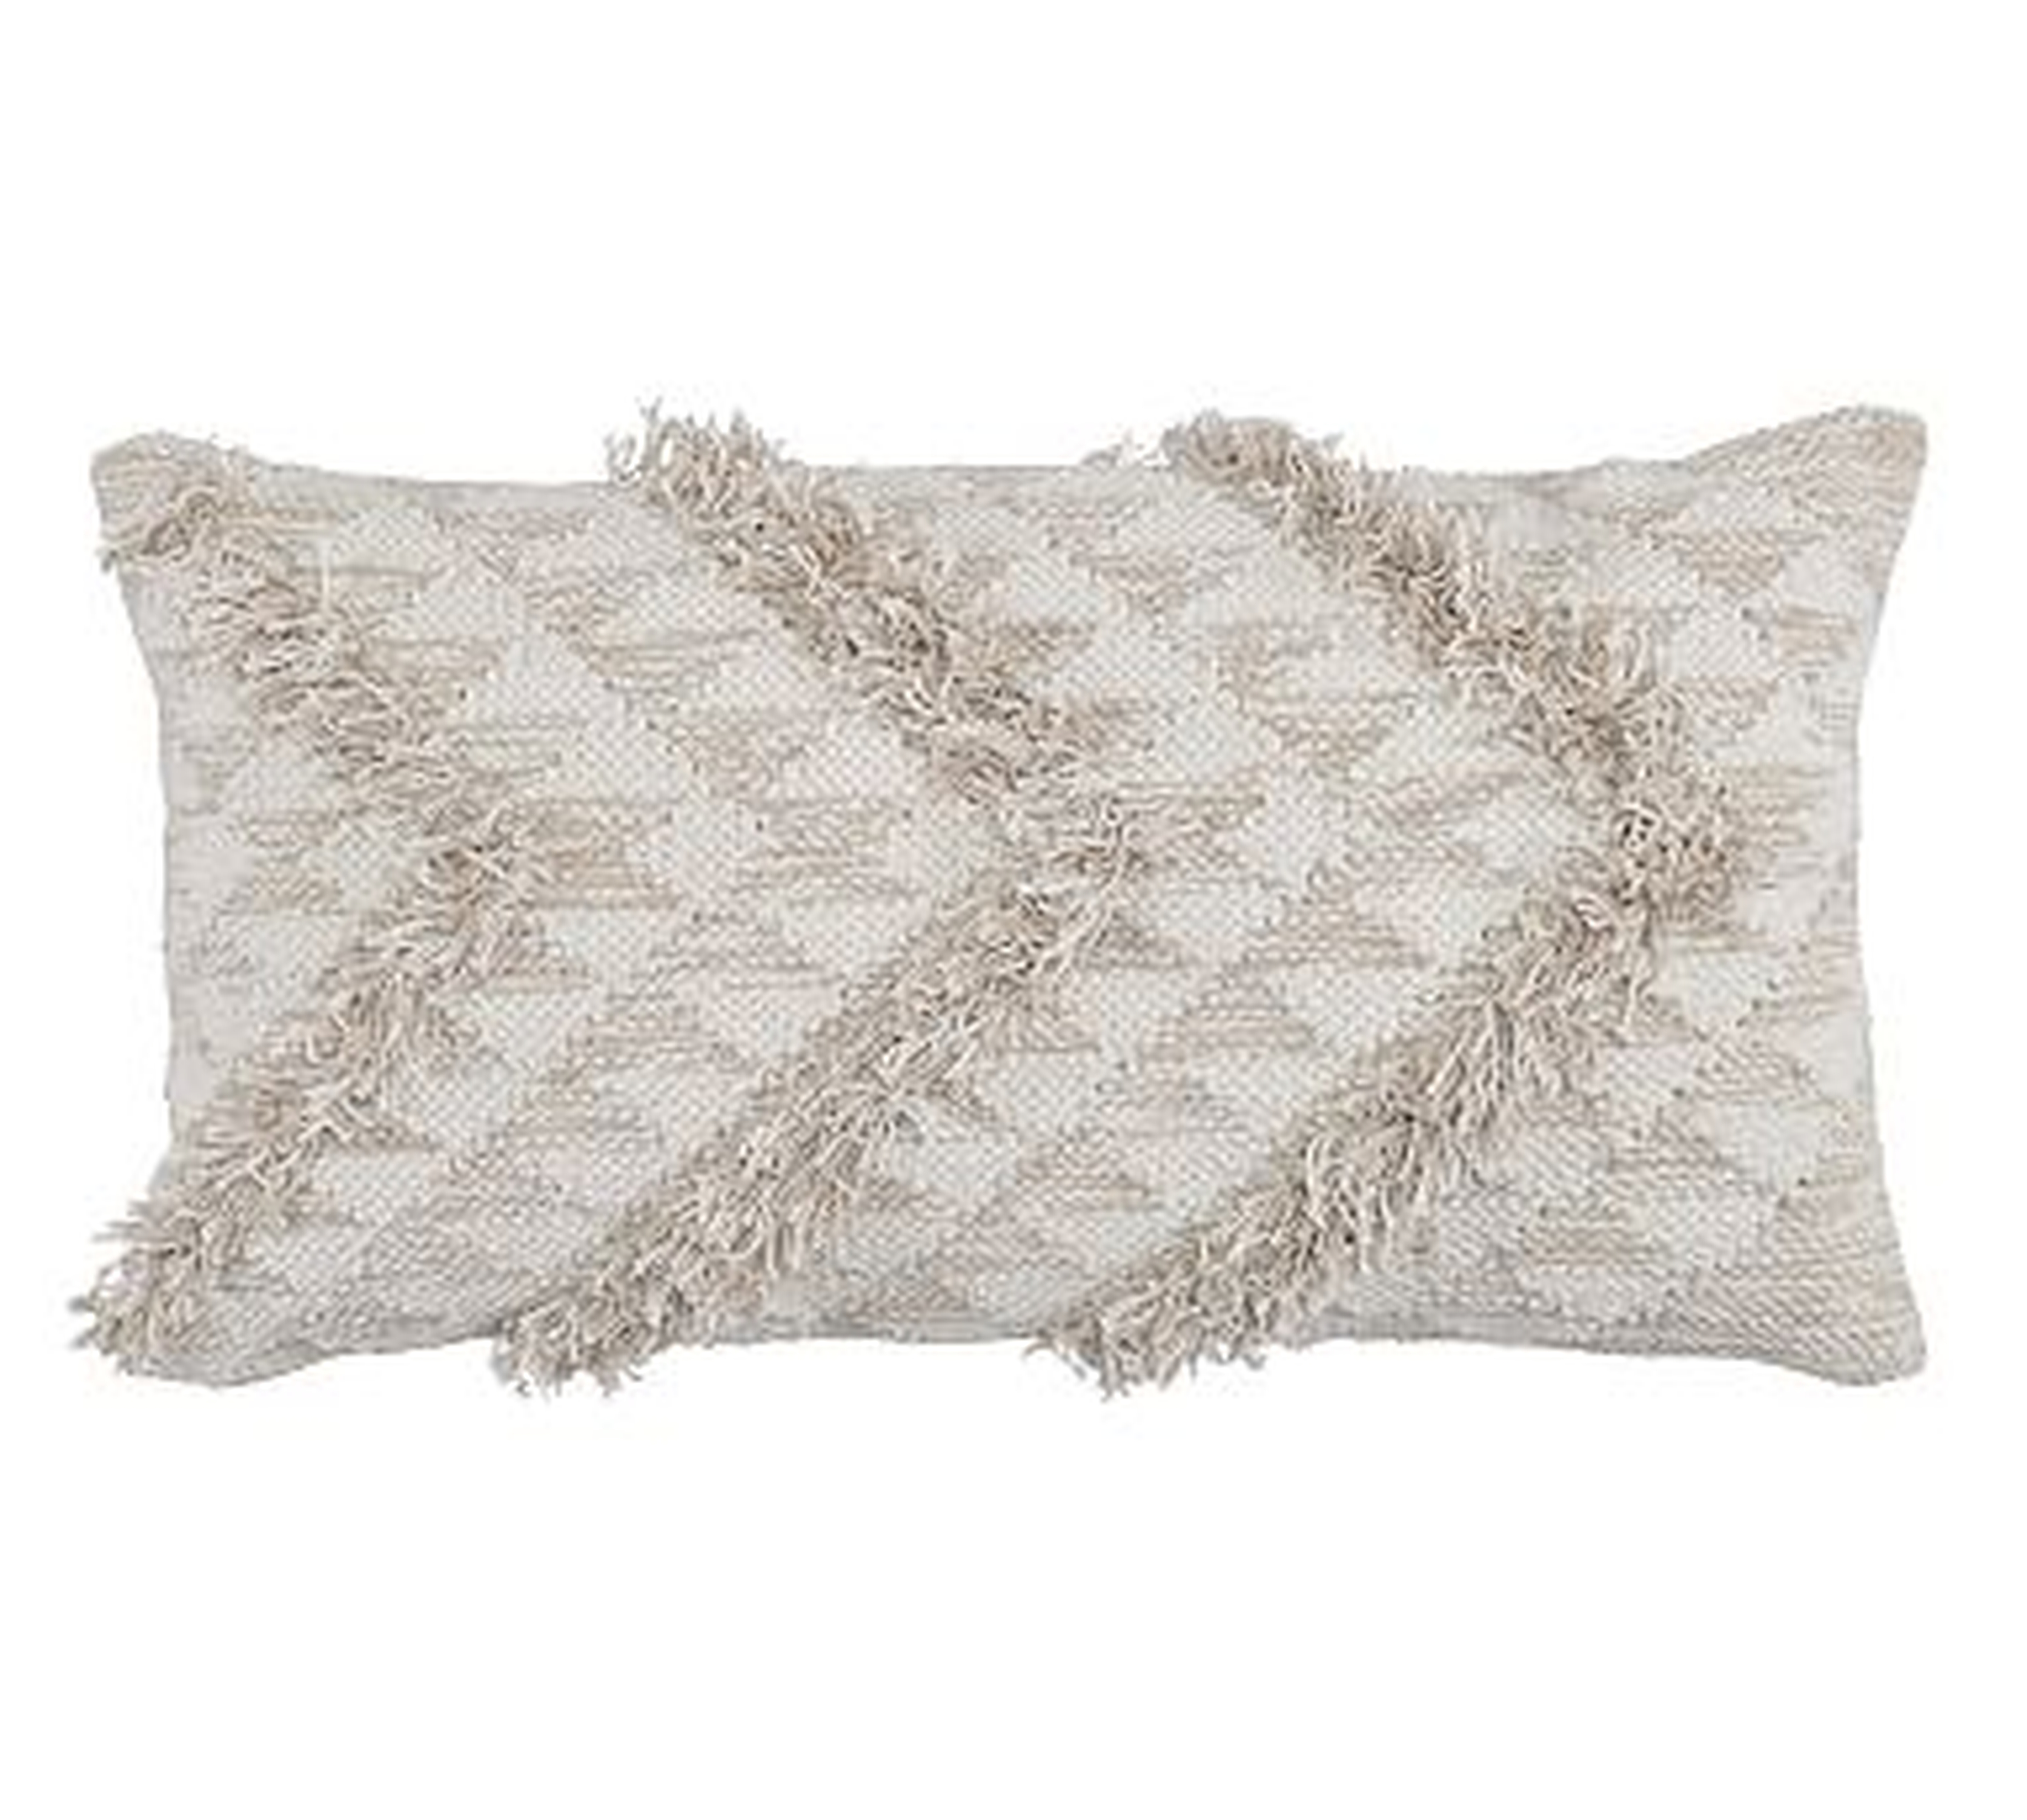 Cassidy Pillow Cover, 14" x 26", Natural - Pottery Barn